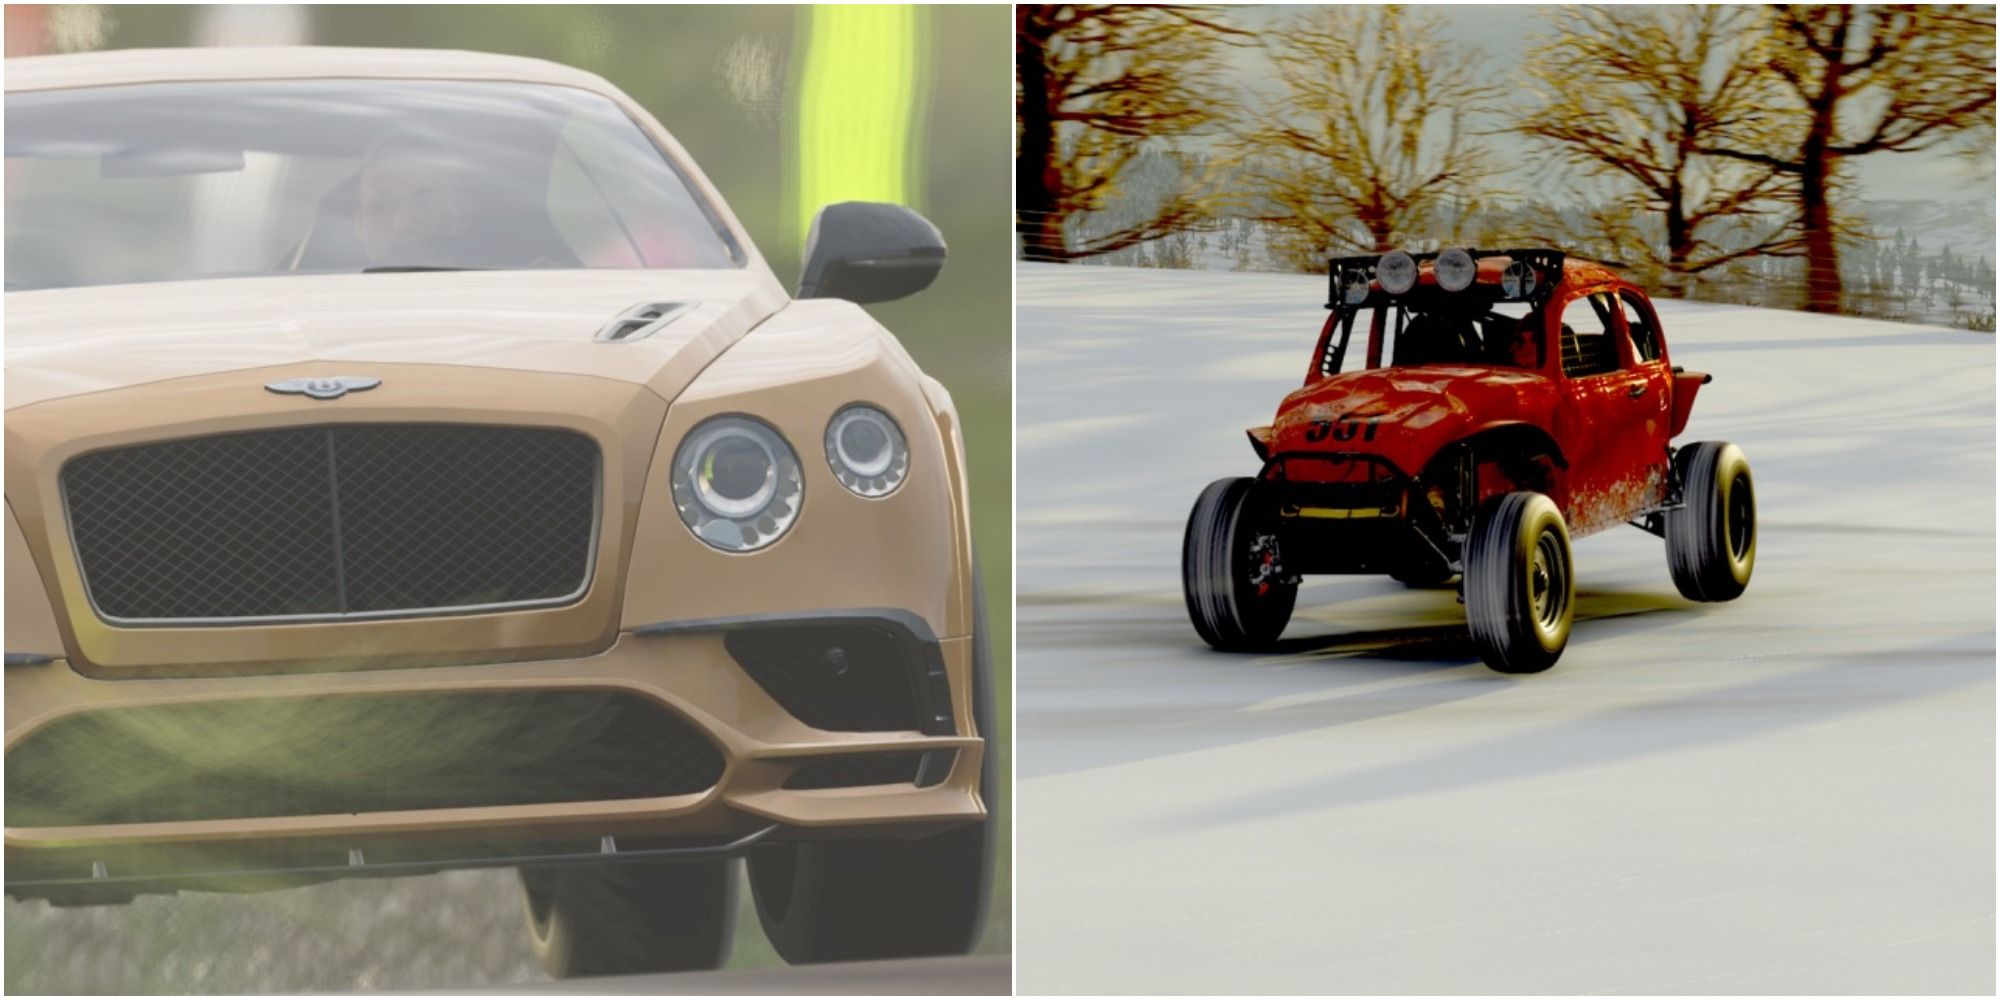 Forza Horizon 4 Feature Image Drifting Cars In Summer And Winter